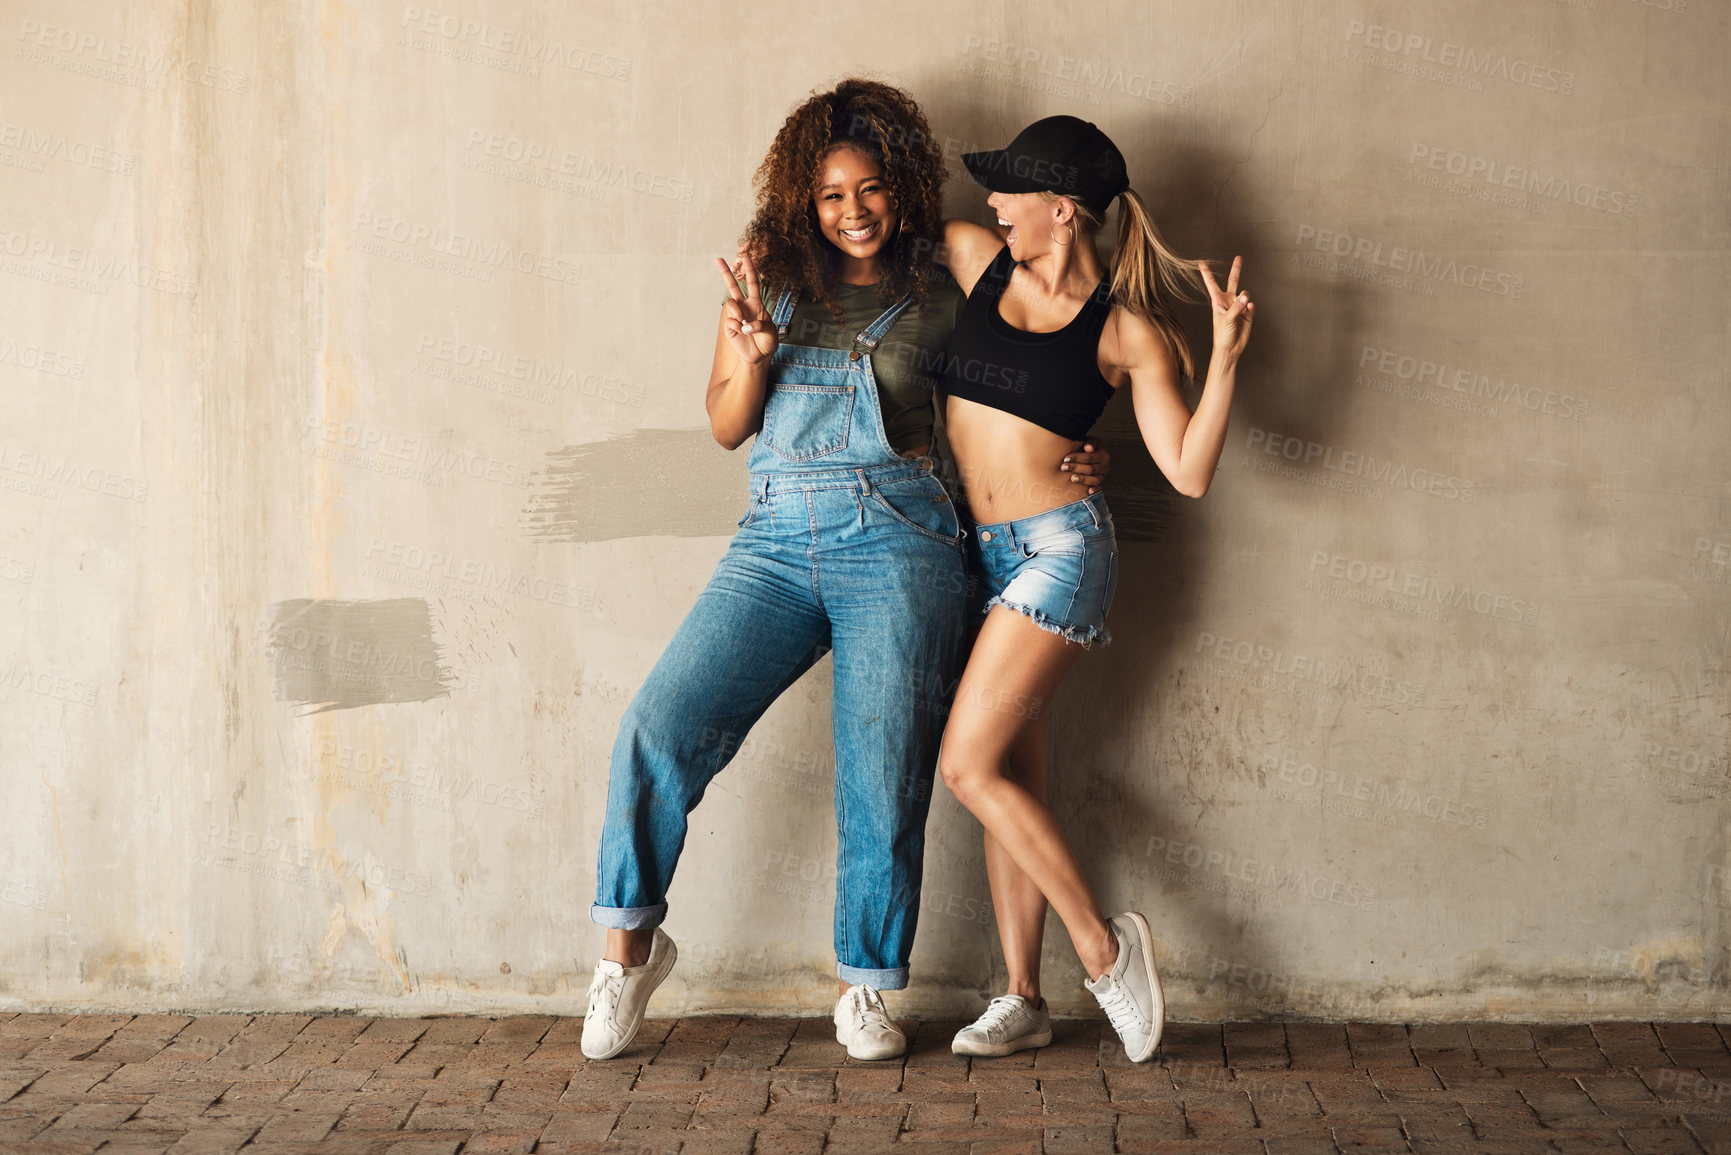 Buy stock photo Portrait of two cheerful young women posing for for a photo while leaning against a wall outside during the day